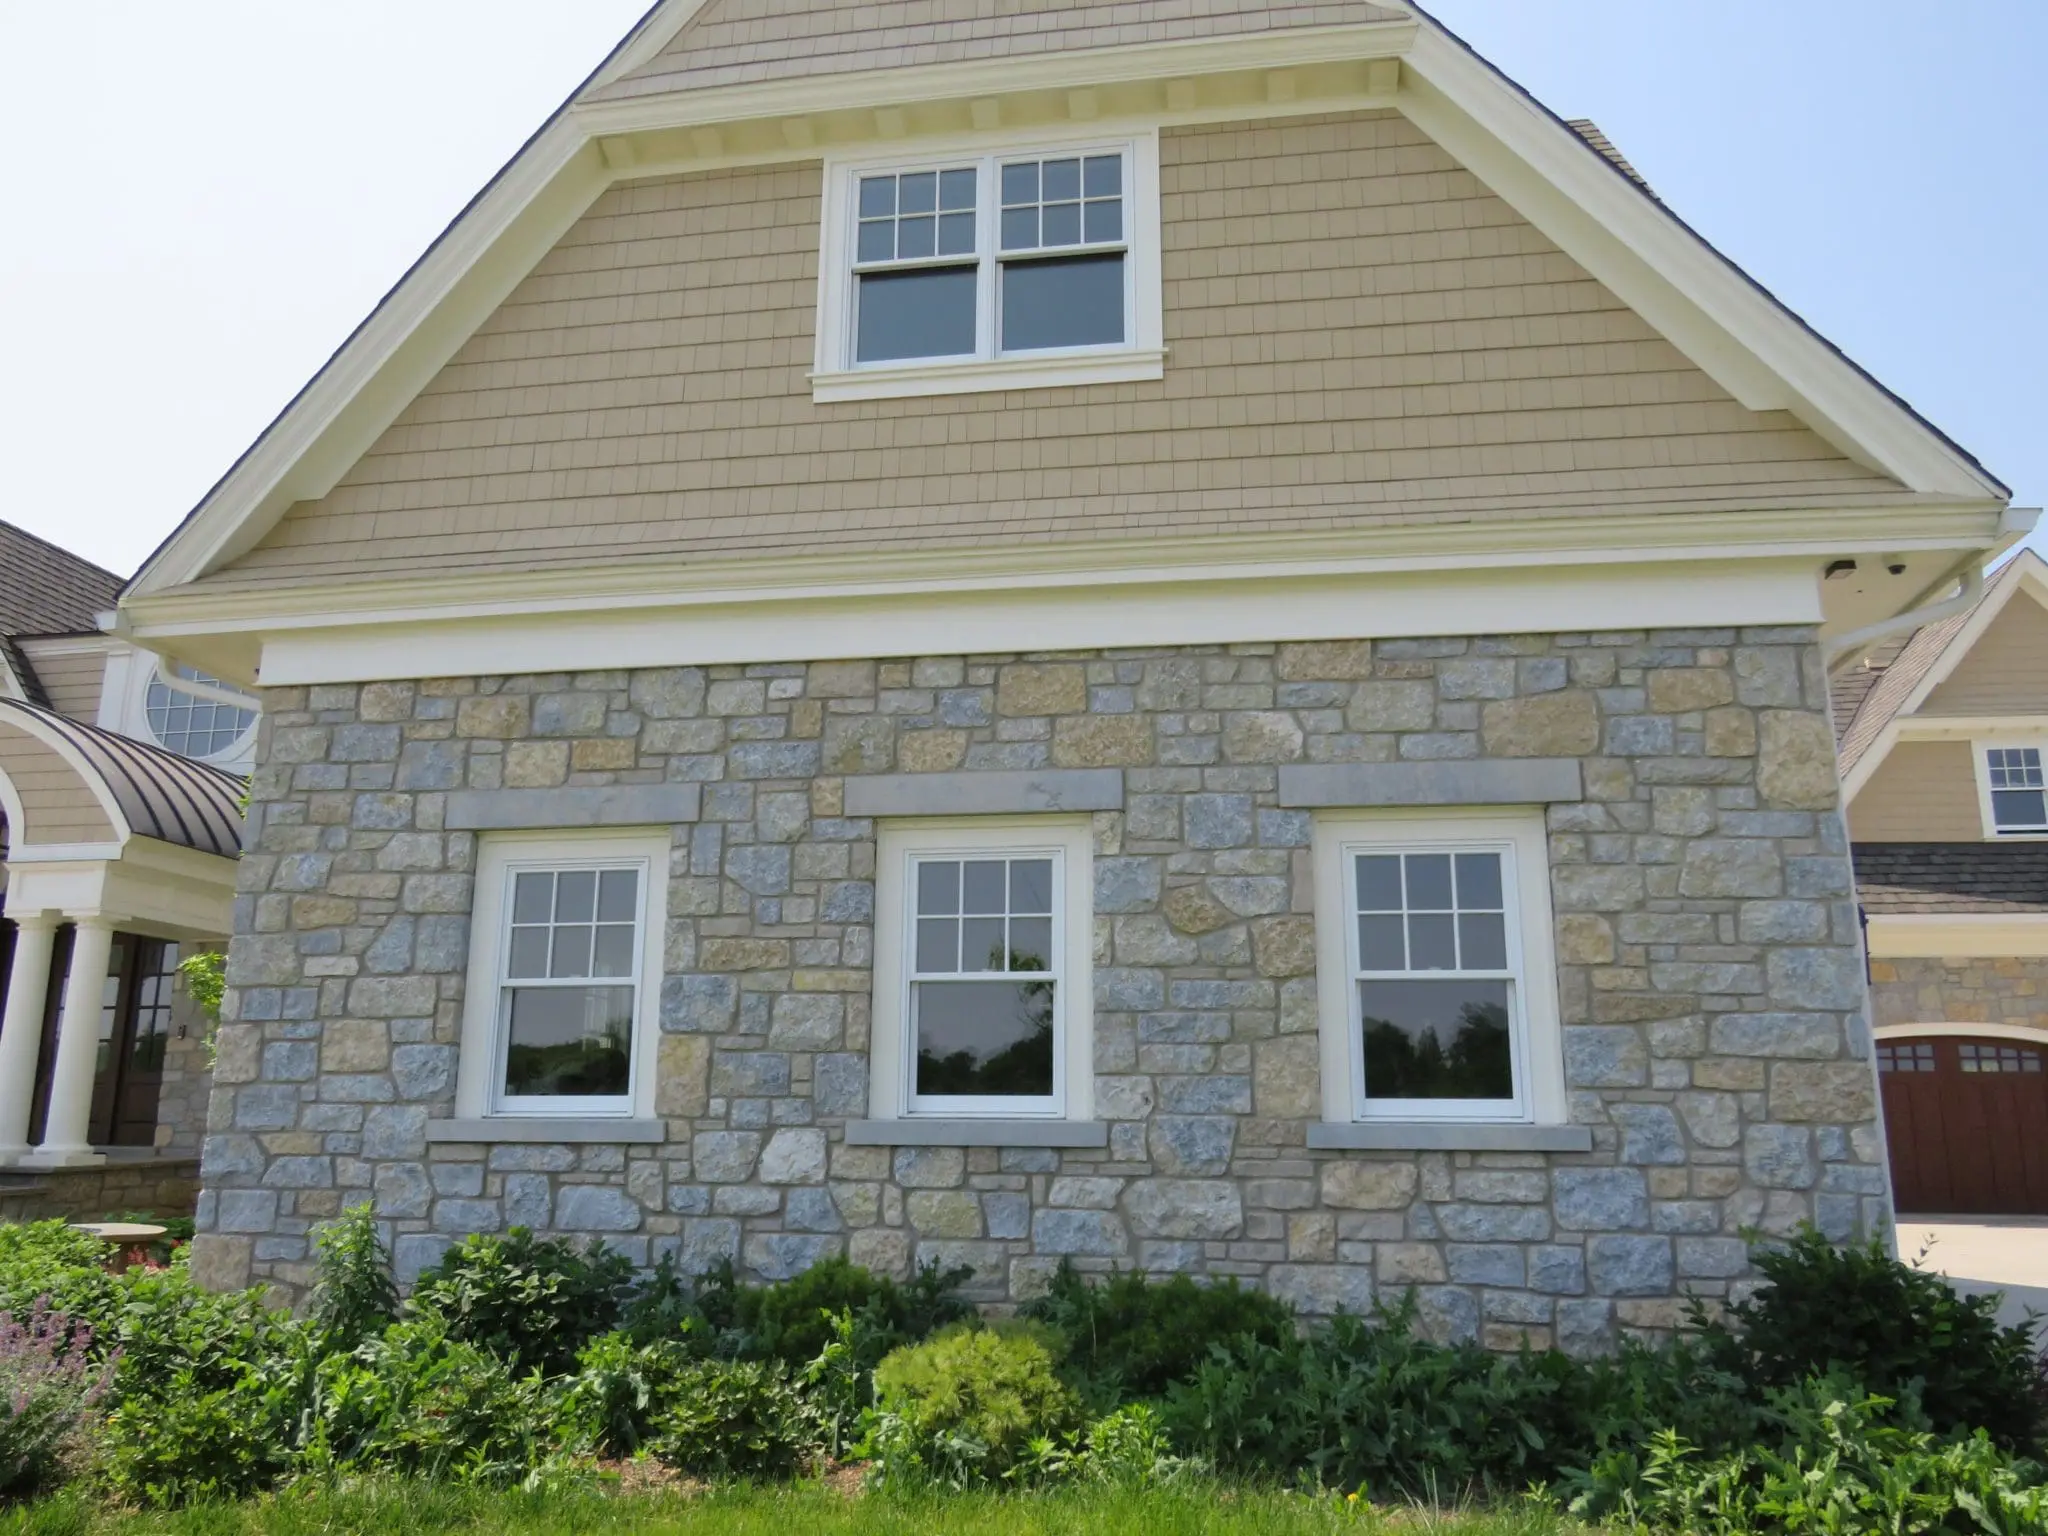 Chateau and Nottingham Natural Limestone Thin Veneer Exterior